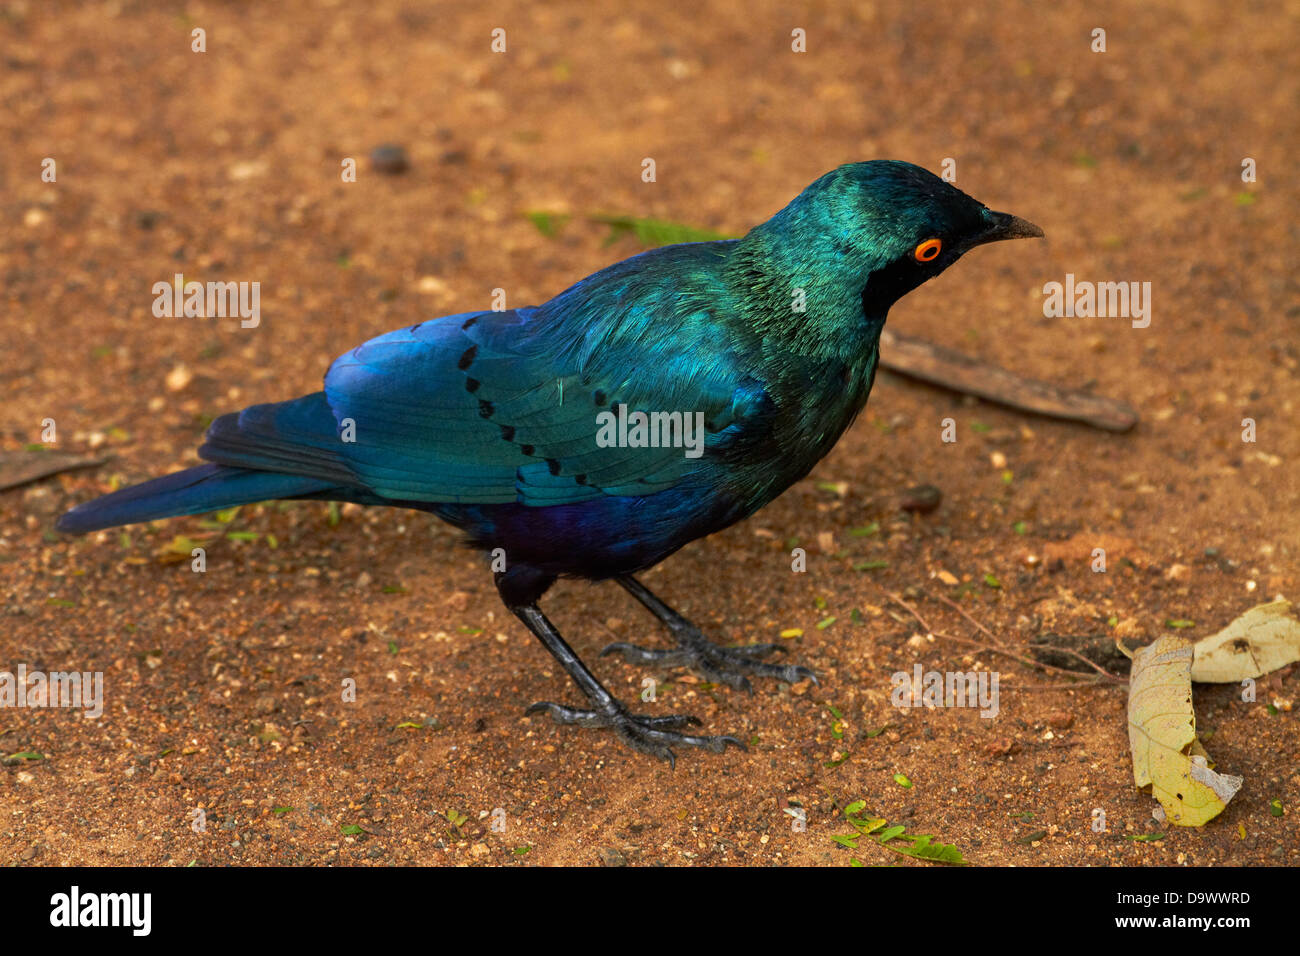 Greater Blue-eared Starling or Greater Blue-eared Glossy-starling (Lamprotornis chalybaeus), Kruger National Park, South Africa Stock Photo